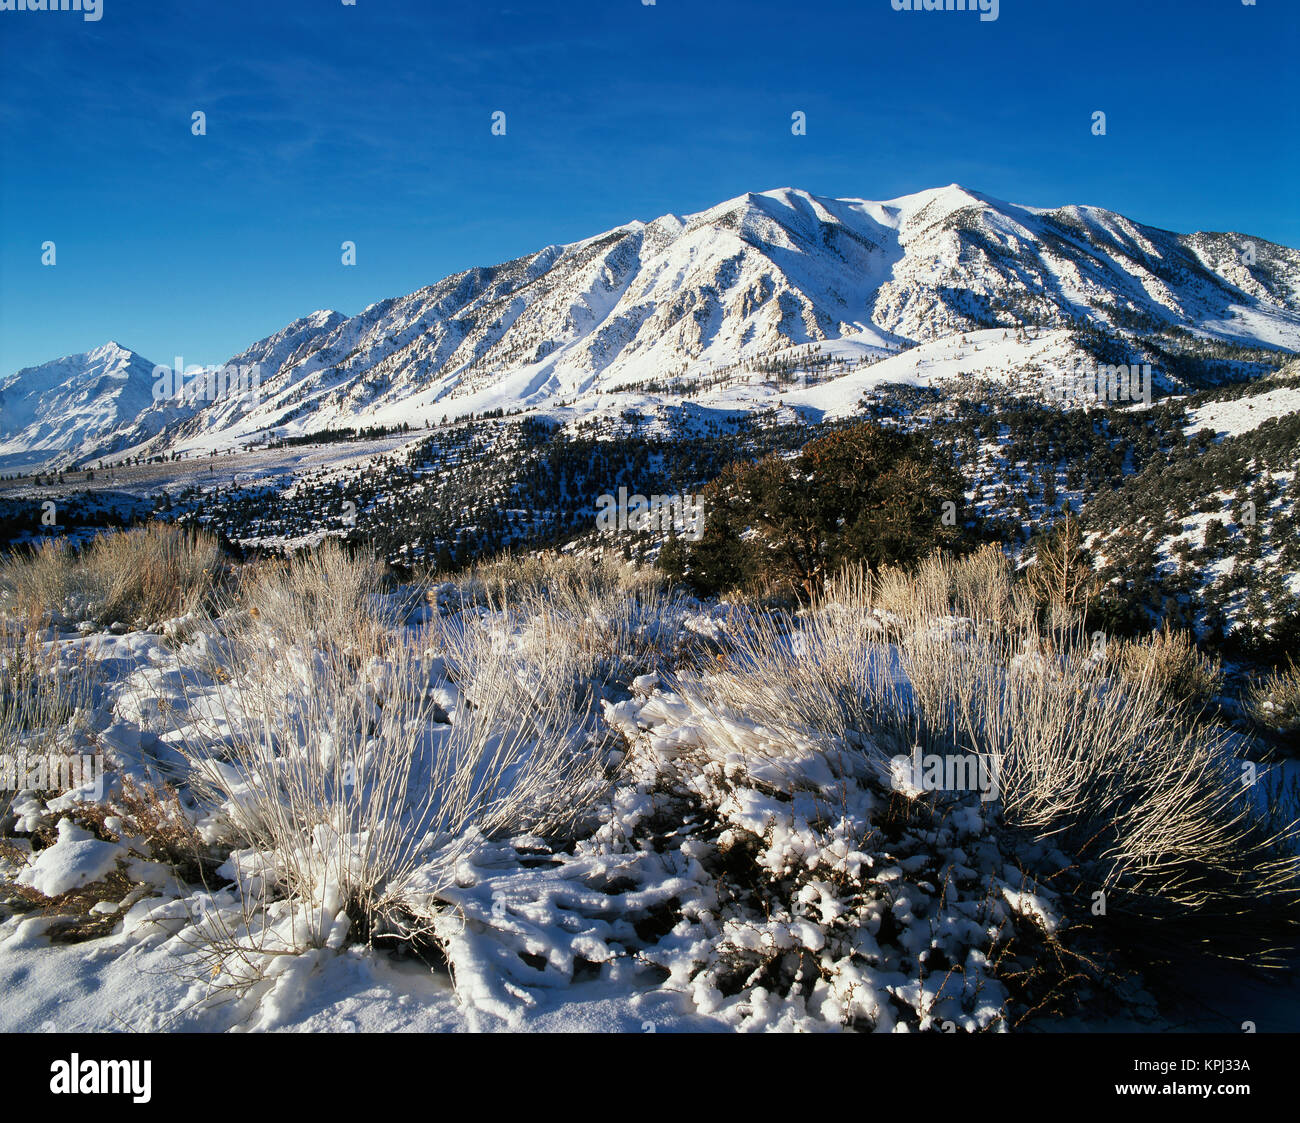 USA, California, Eastern Sierra Range, View of snow-covered mountain with bushes (Large format sizes available) Stock Photo